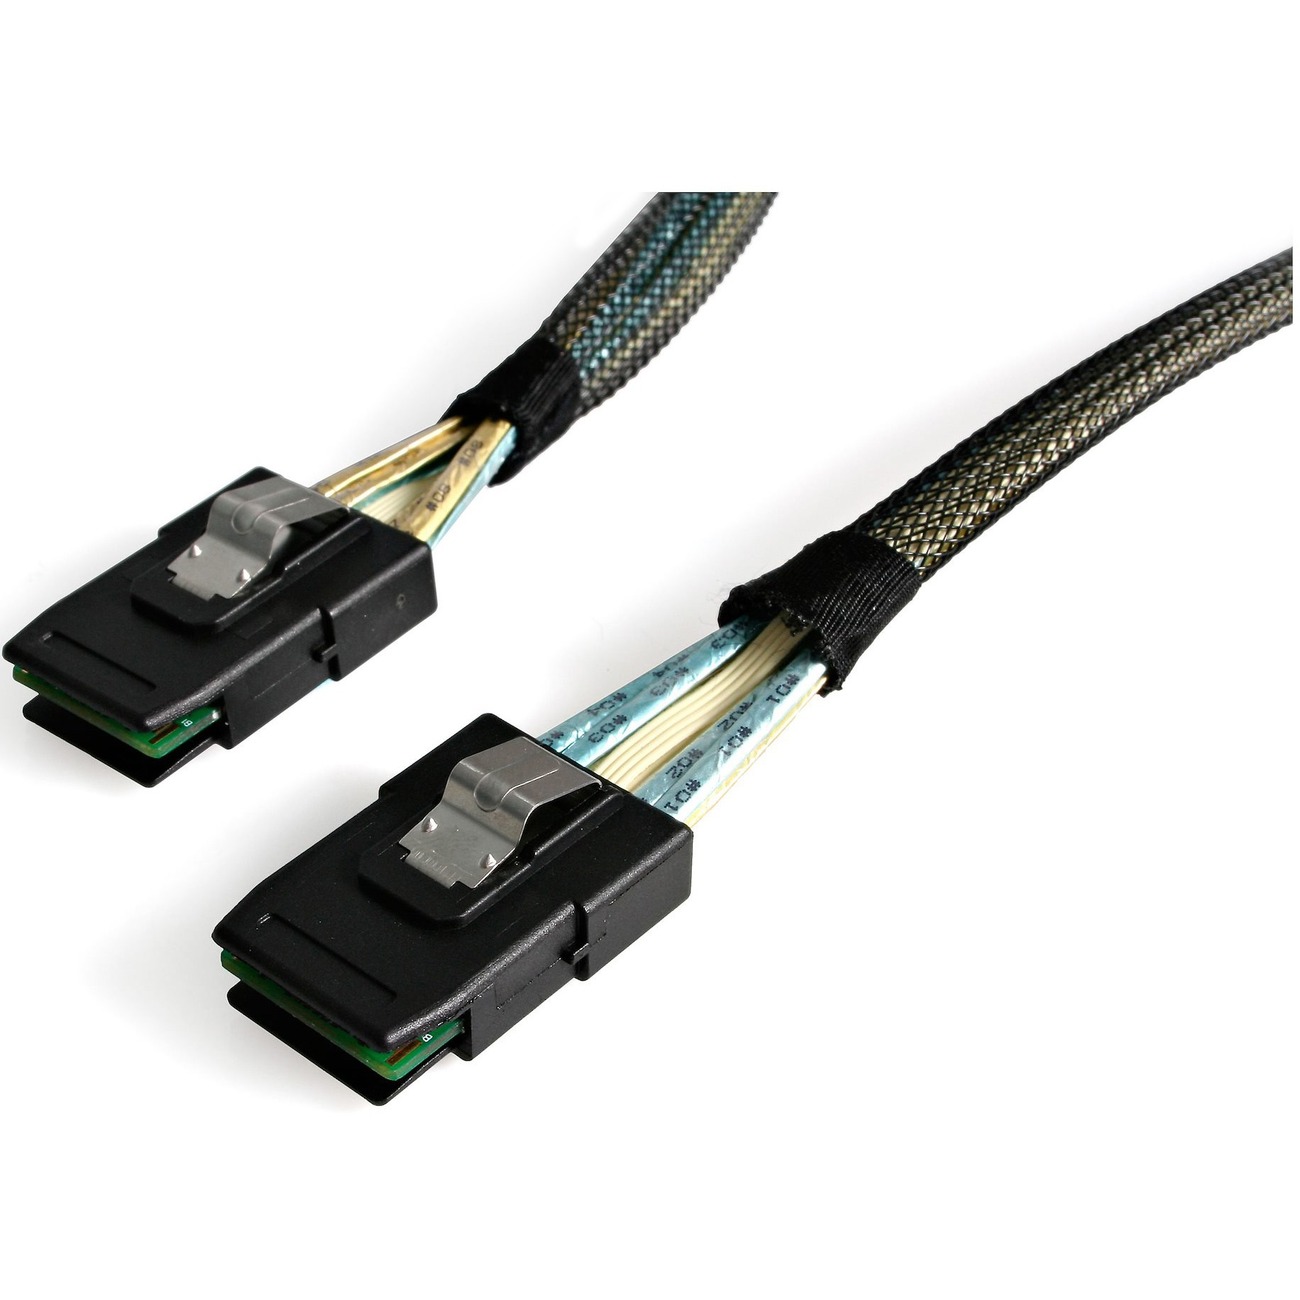 StarTech.com 50cm Internal Mini-SAS Cable To SFF-8087 & Sideband Serial Attached SCSI (SAS) internal cable - with Sidebands - 4-Lane - 36 pin 4i Mini MultiLane - 36 pin 4i Mini MultiLane - 50 cm - Provide durable connectivity for high ...